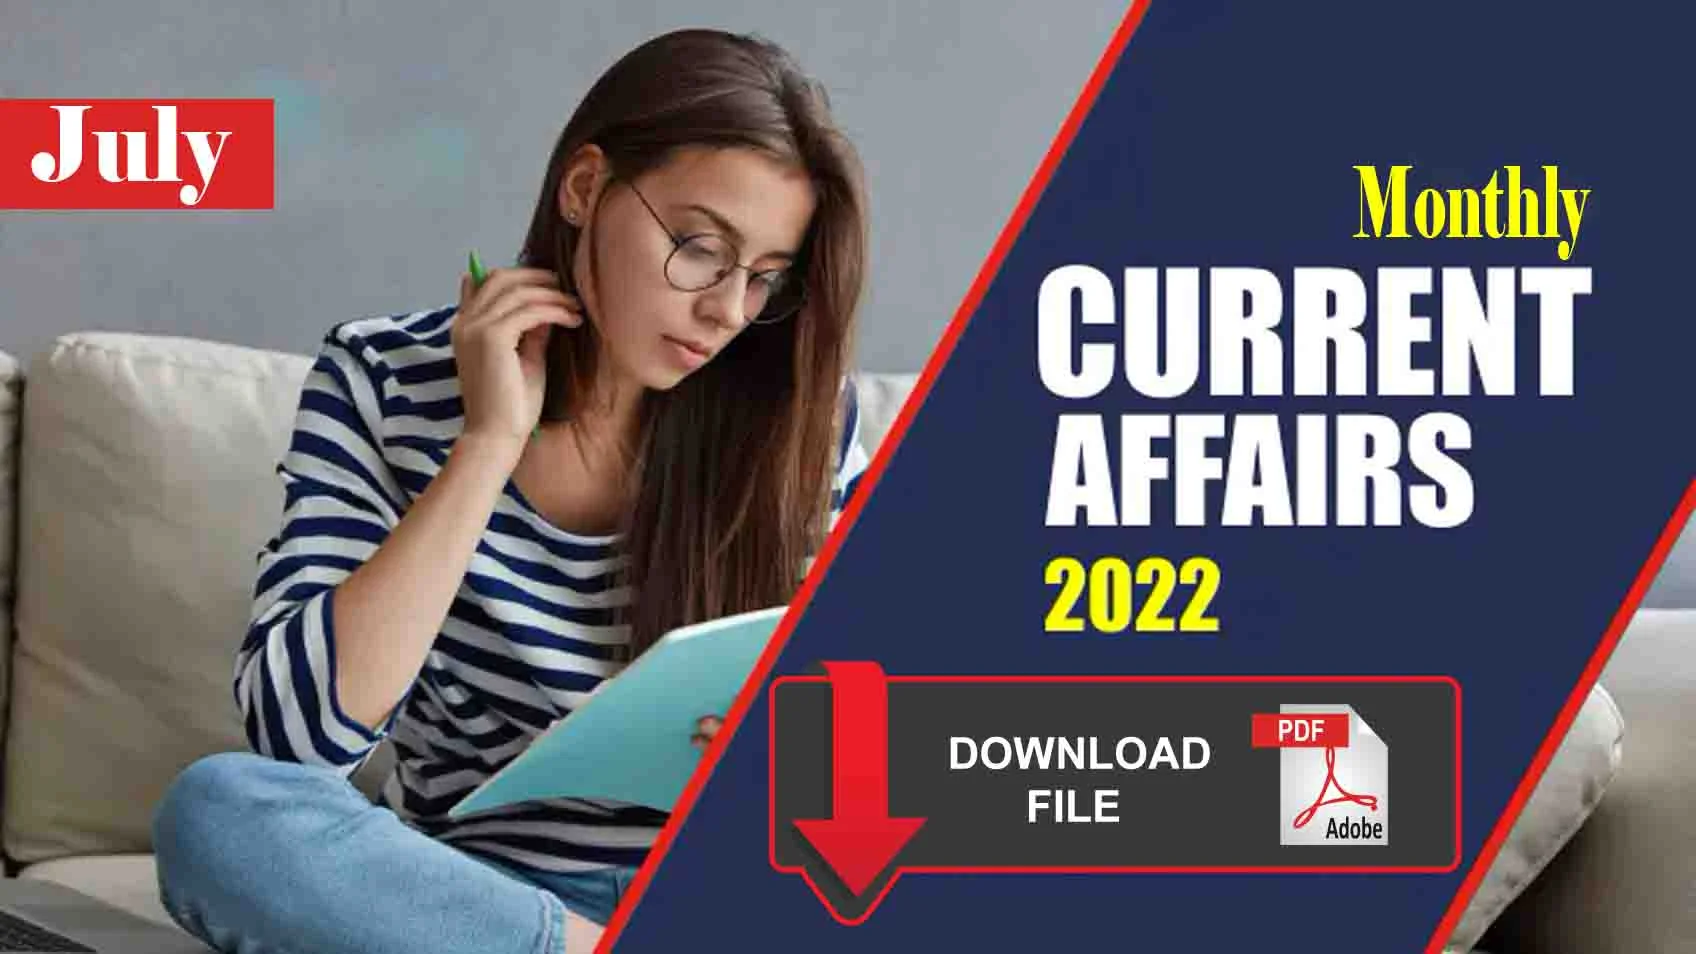 Download | July Monthly Current Affairs 2022 pdf in Hindi